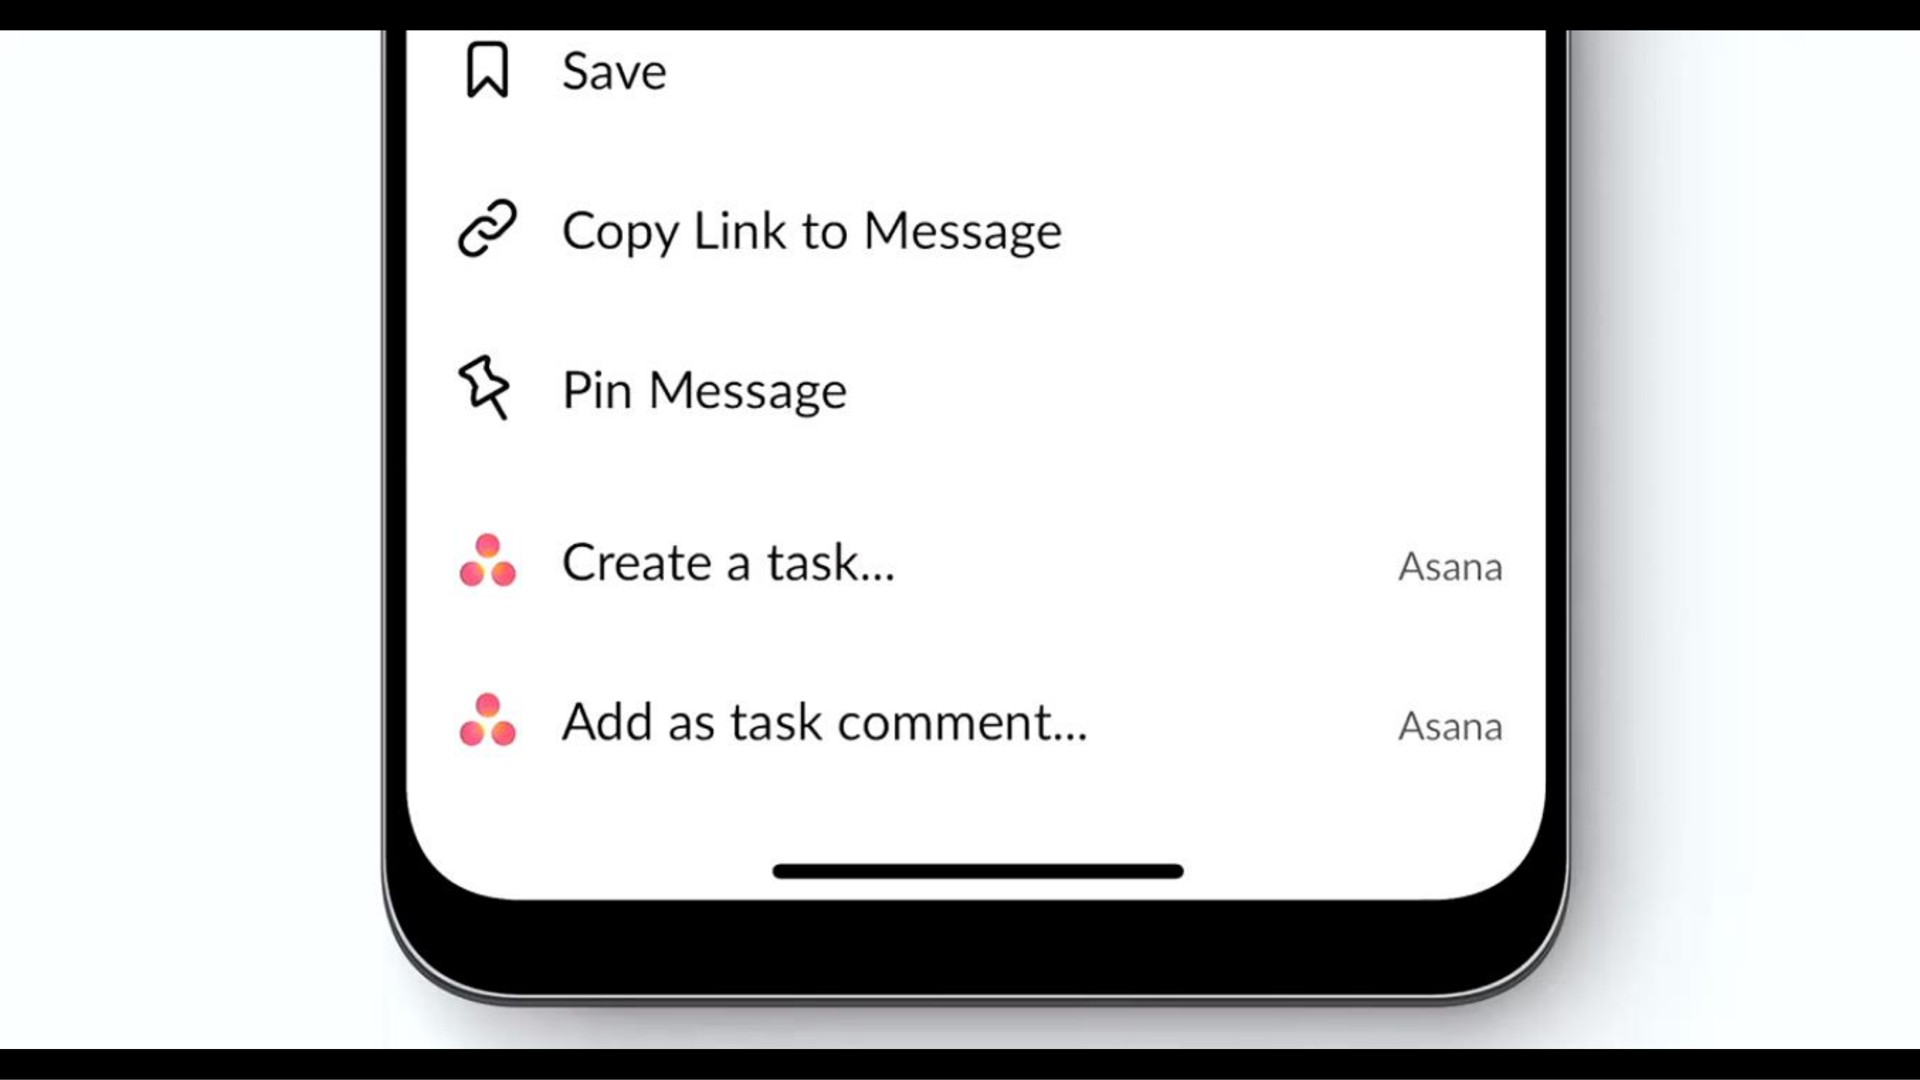 save copy link to message pin message asana create a task add as task comment | Asana